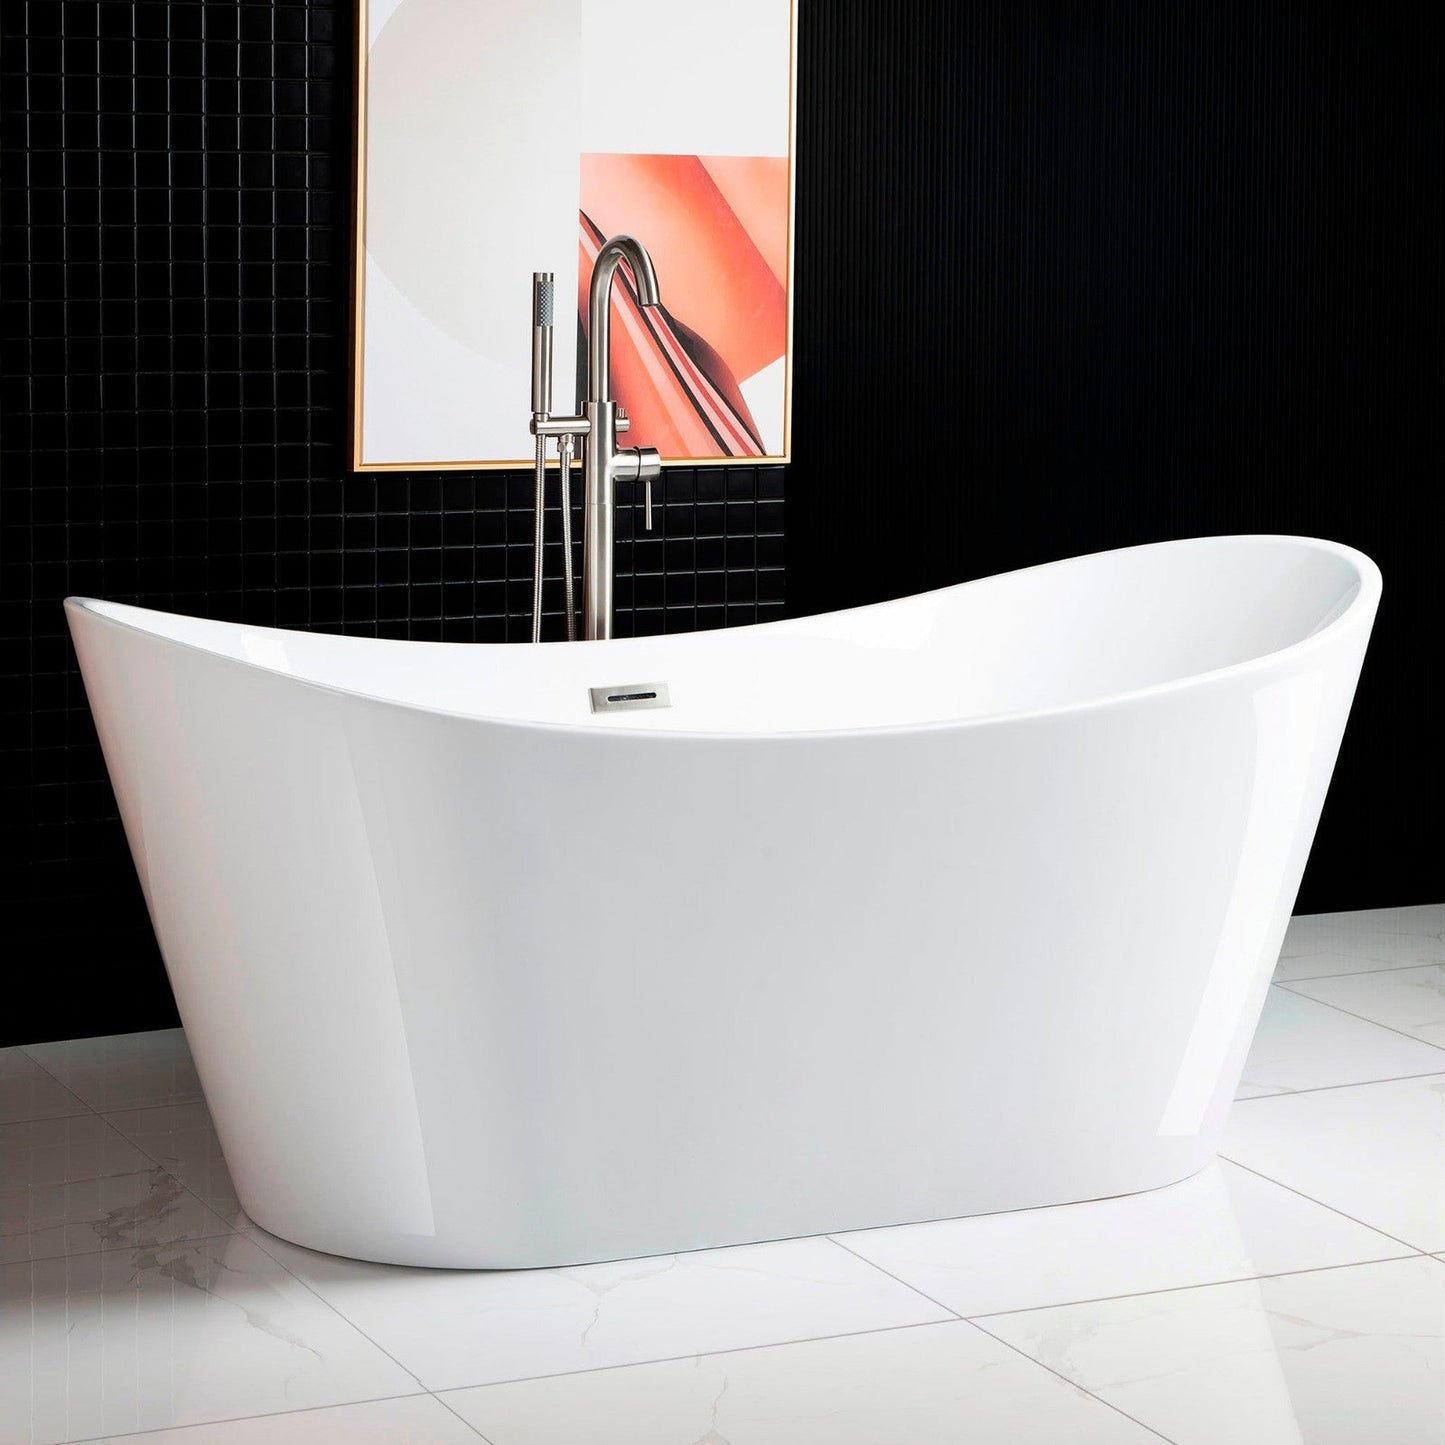 WoodBridge B0010 67" White Acrylic Freestanding Contemporary Soaking Bathtub With Chrome Drain, Overflow, F0002CHVT Tub Filler and Caddy Tray